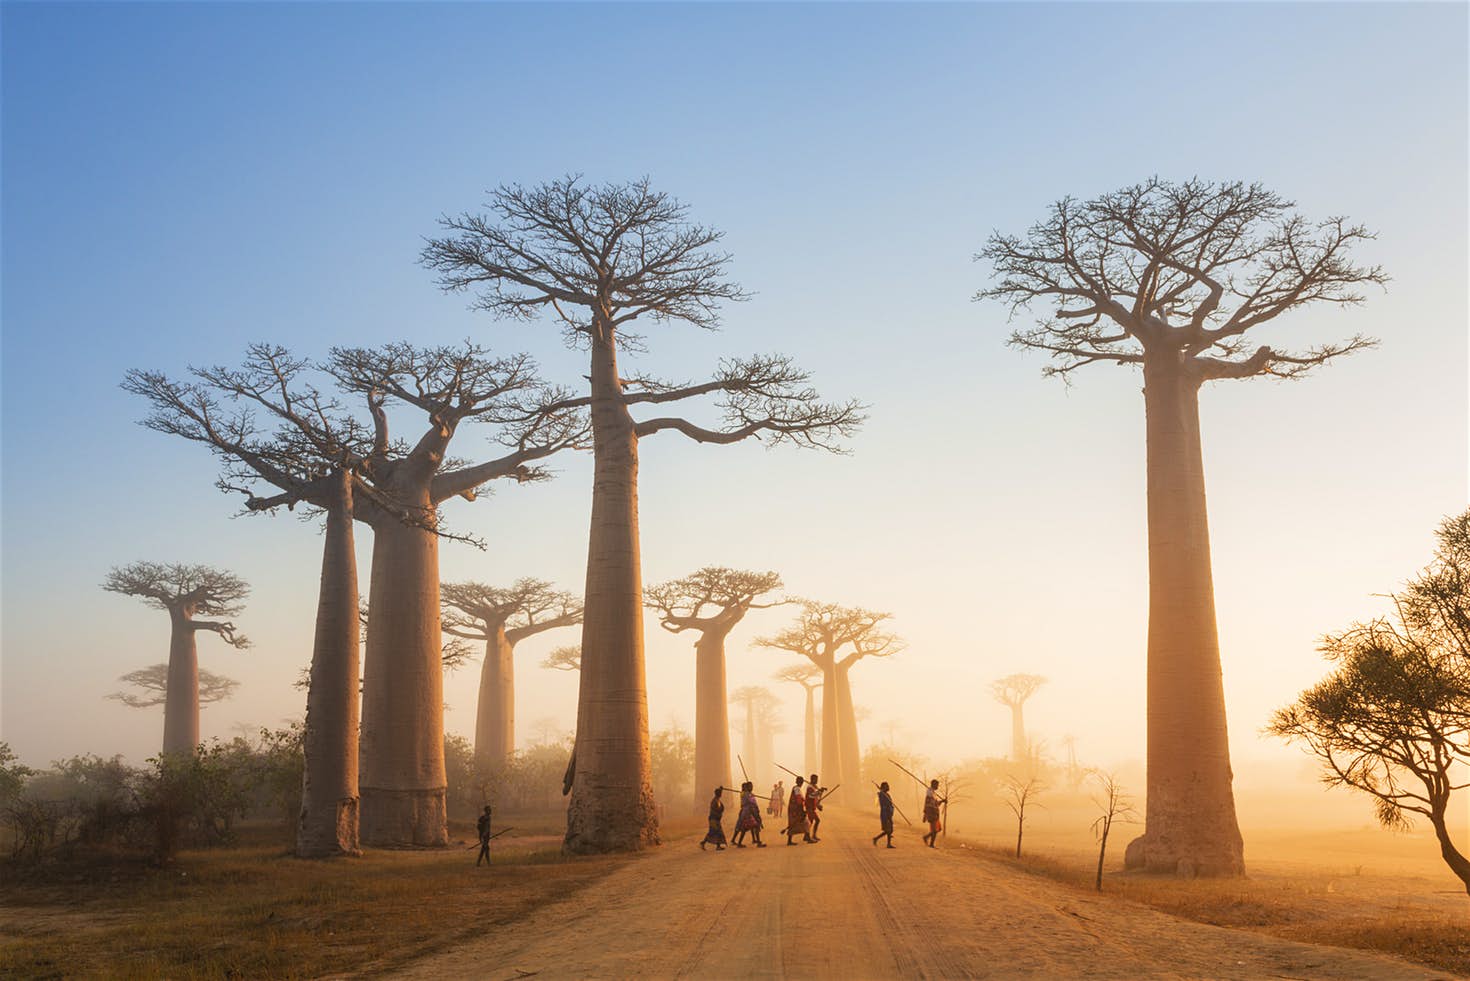 🌎 If You Can Ace This World Geography Trivia Quiz, You’re Smarter Than Most People Avenue of the Baobabs, Madagascar